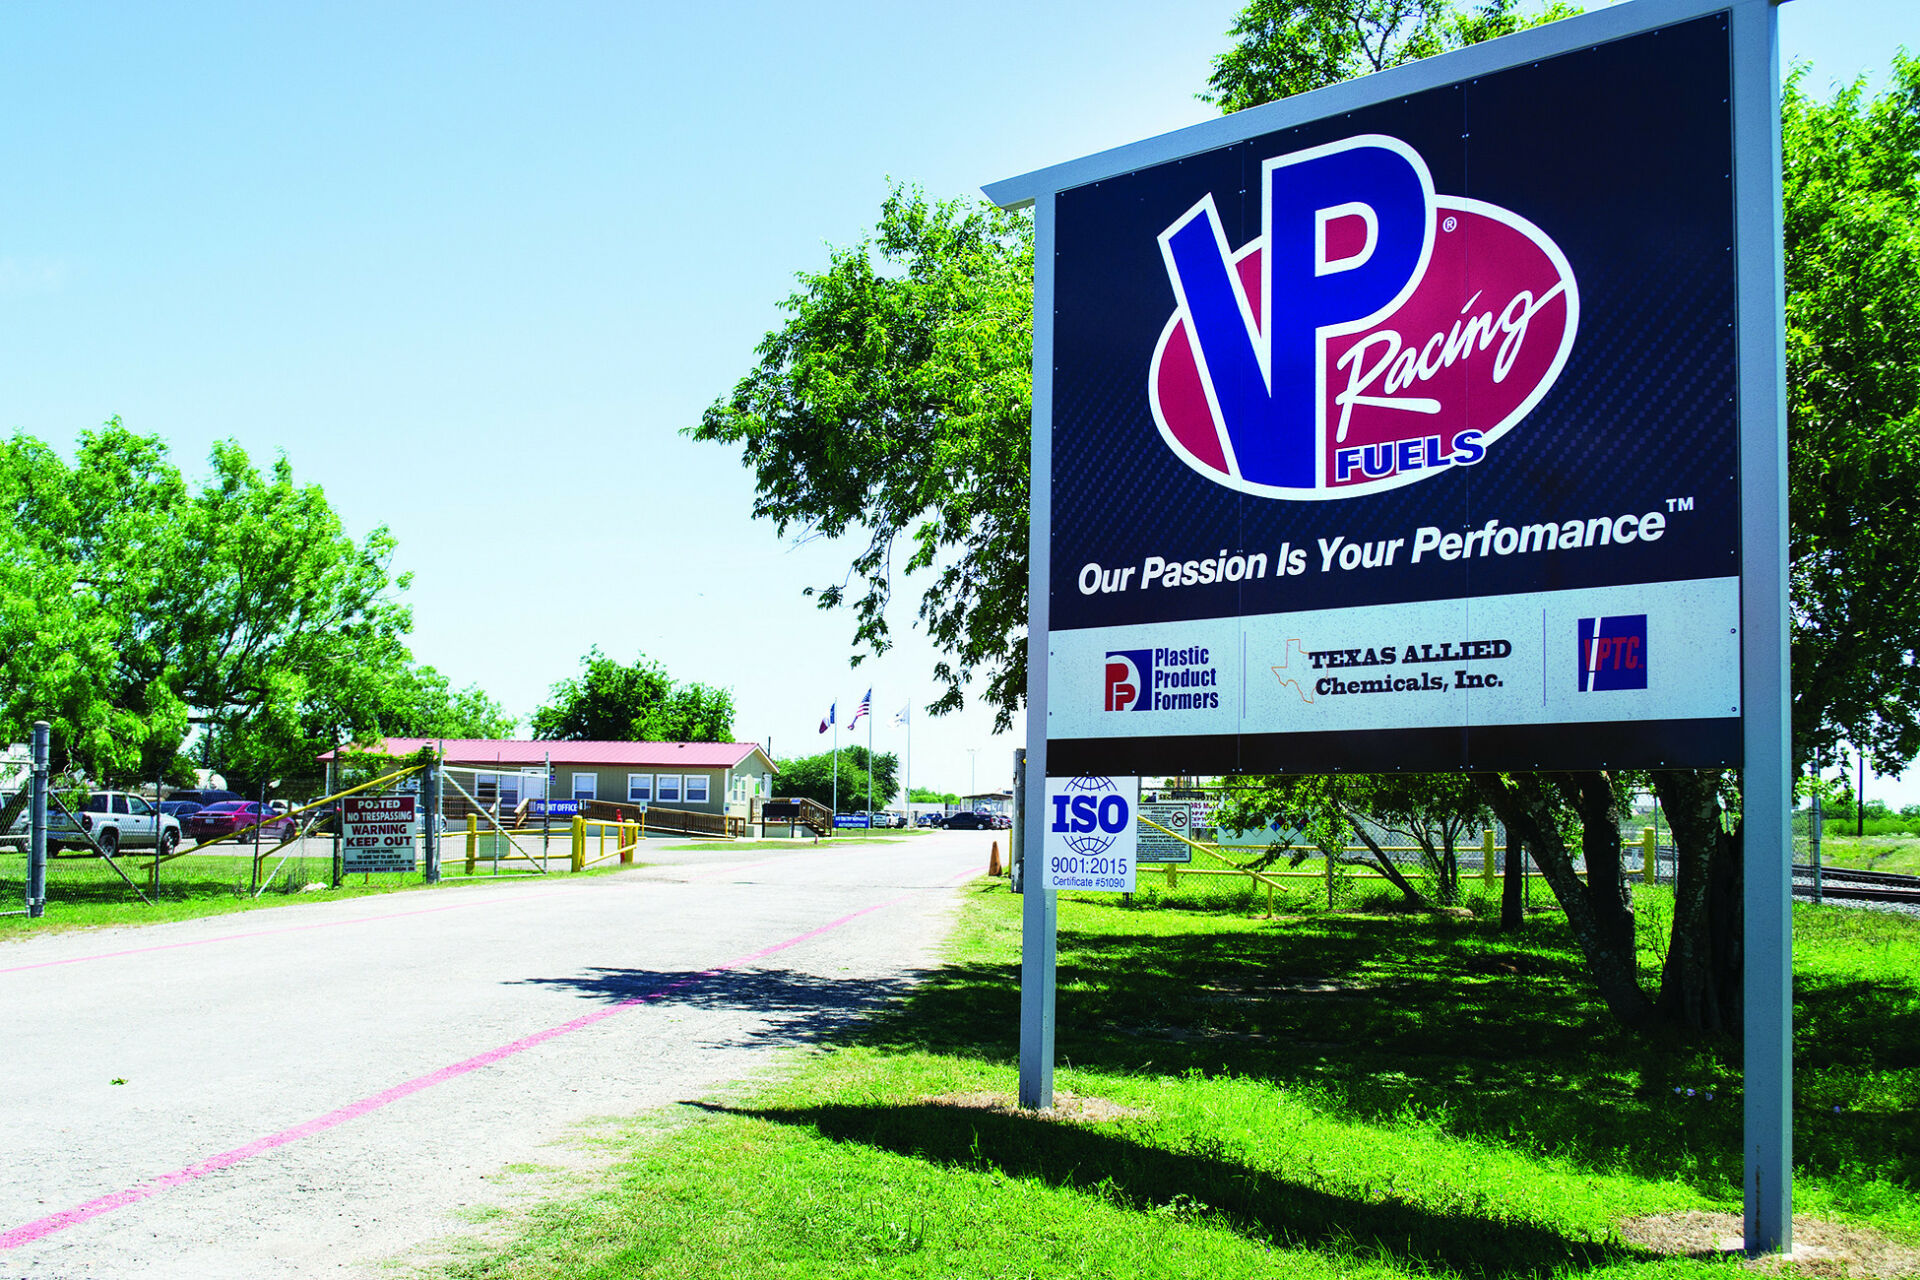 The VP Racing Fuels main production plant is on 50 acres south of San Antonio, Texas. Photo by David Swarts.